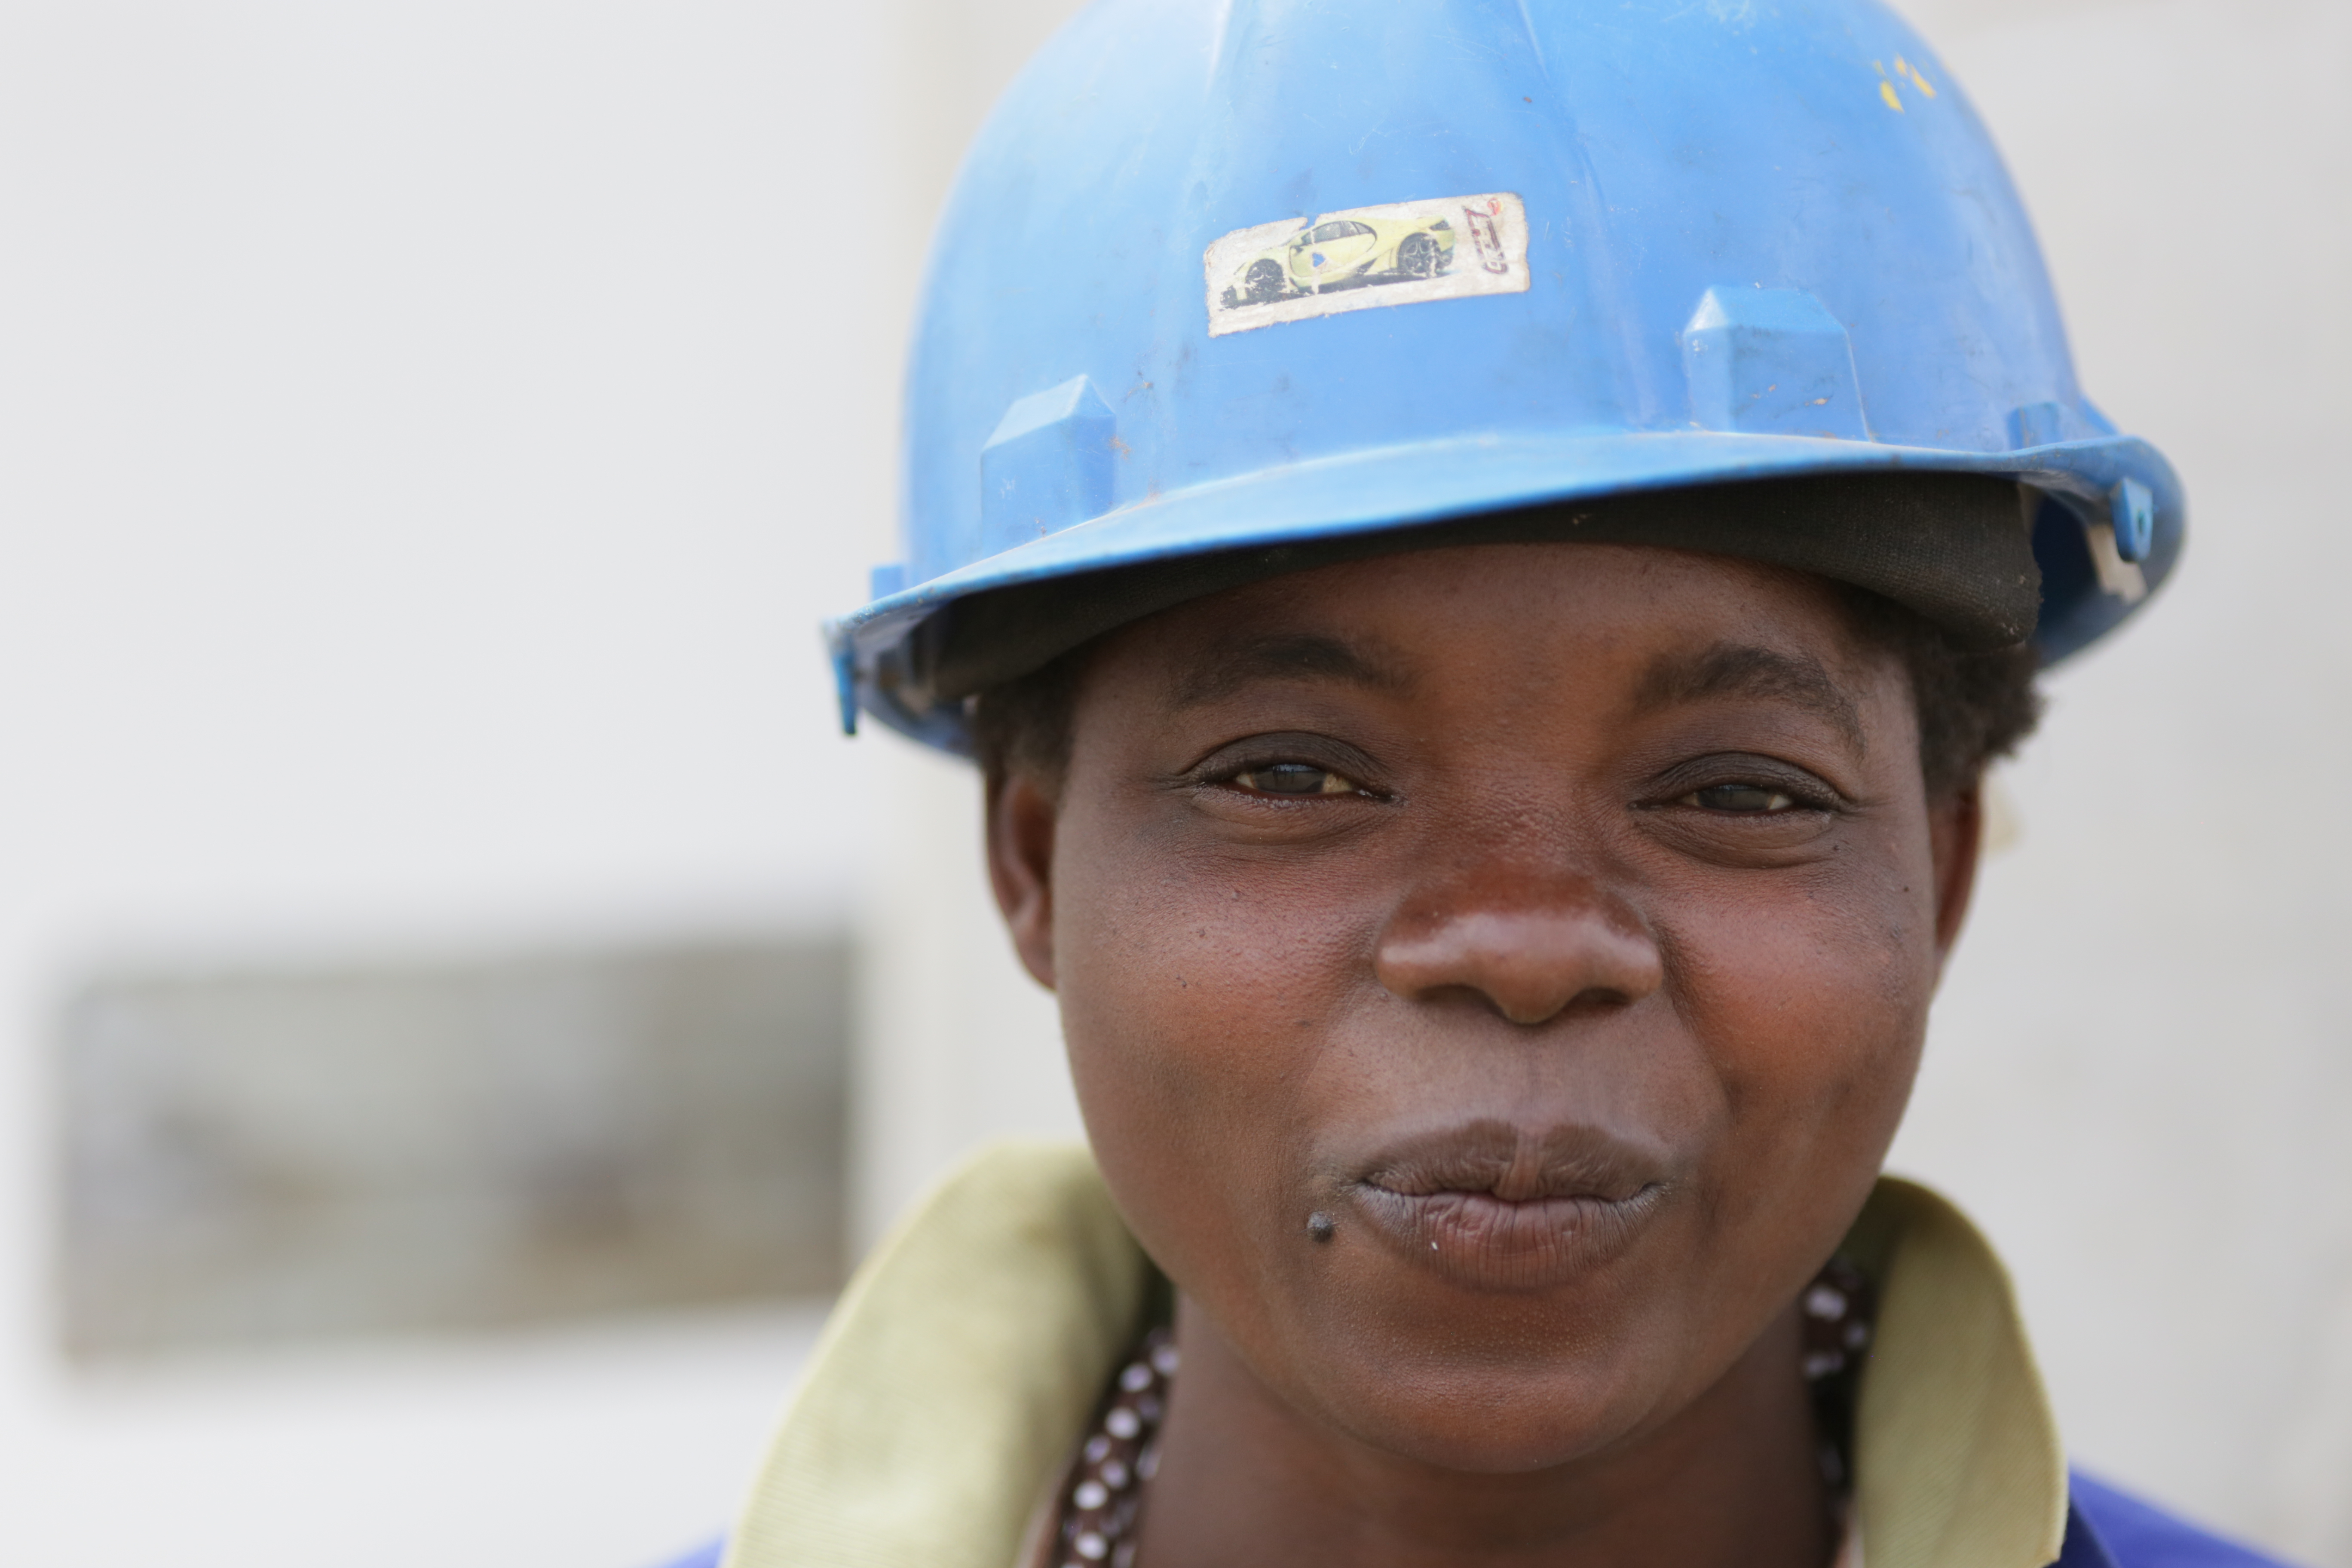 Photograph of a female utility worker